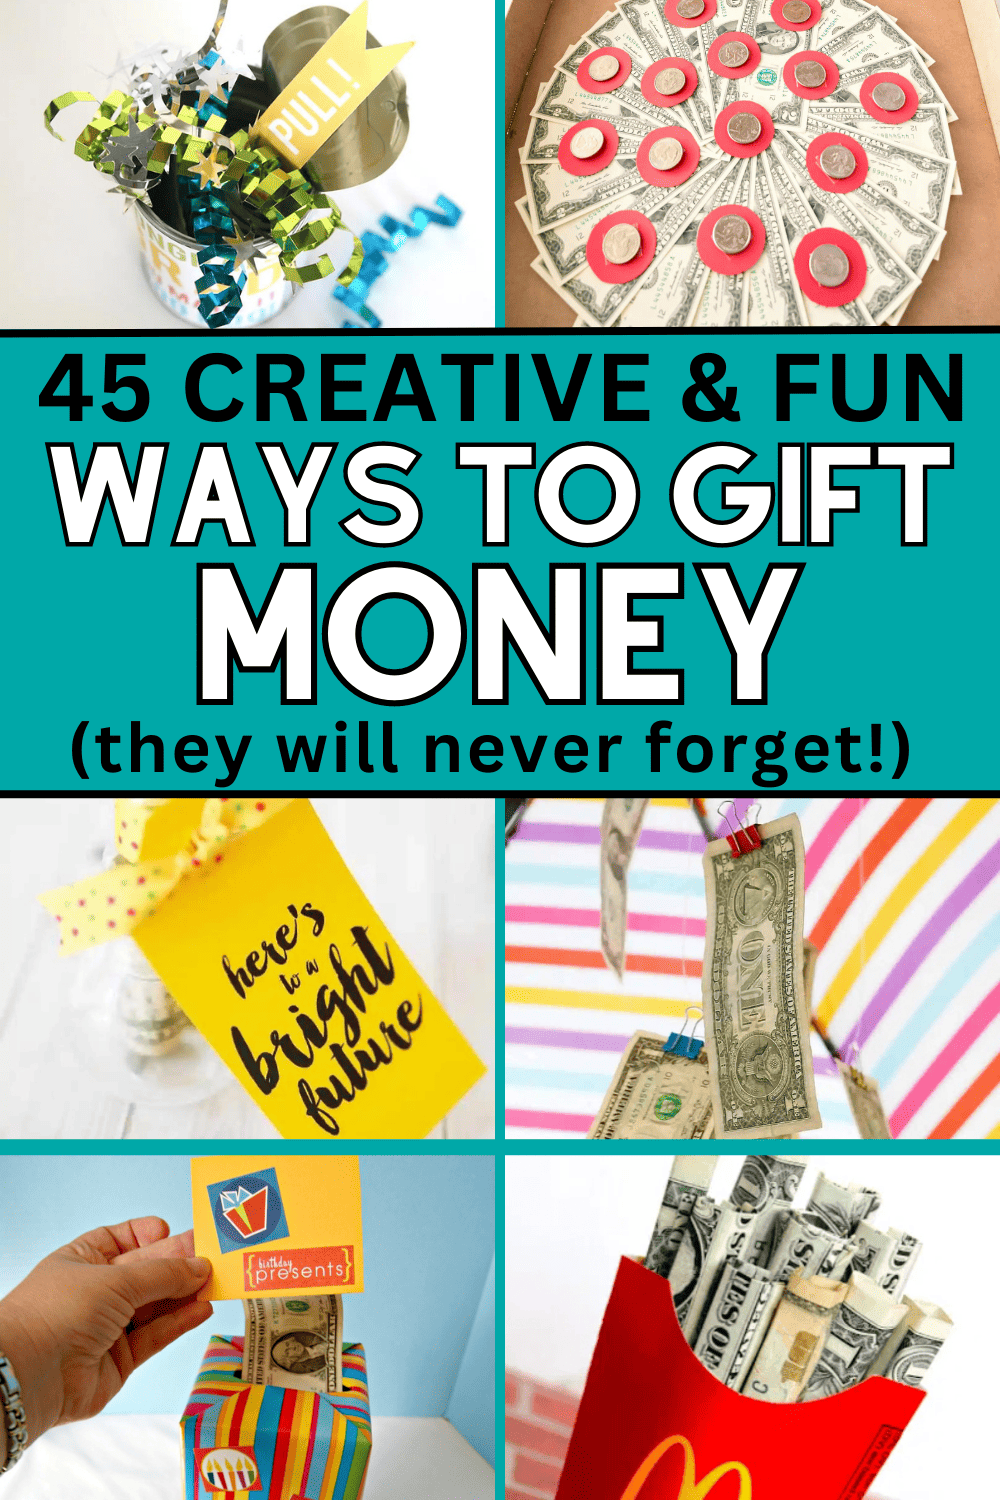 35 Unique DIY Gift Ideas for Any Occasion (with Step-by-Step Instructions)